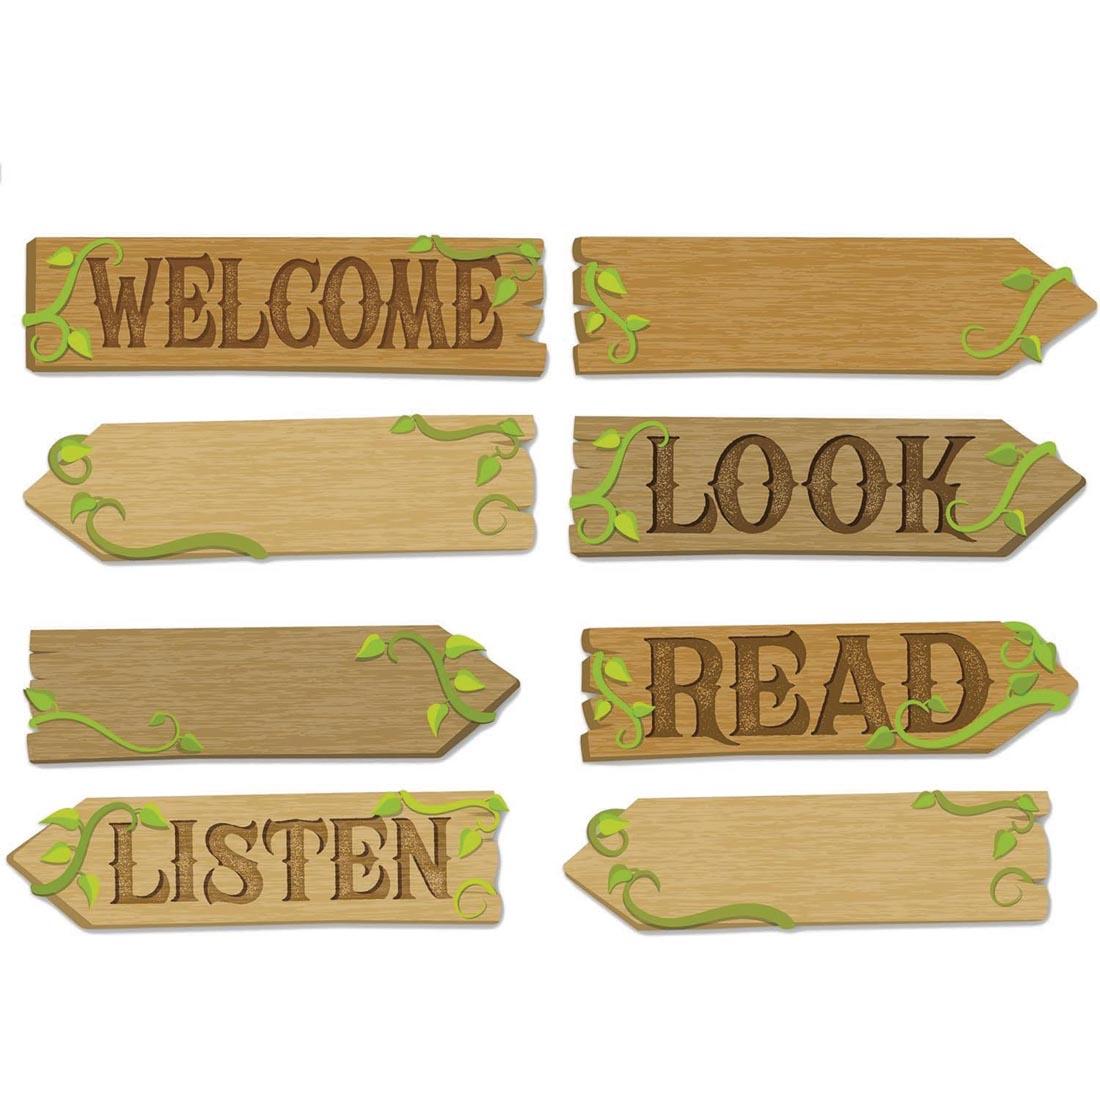 Directional Signs Mini Bulletin Board Set from the Once Upon A Dream collection by Eureka